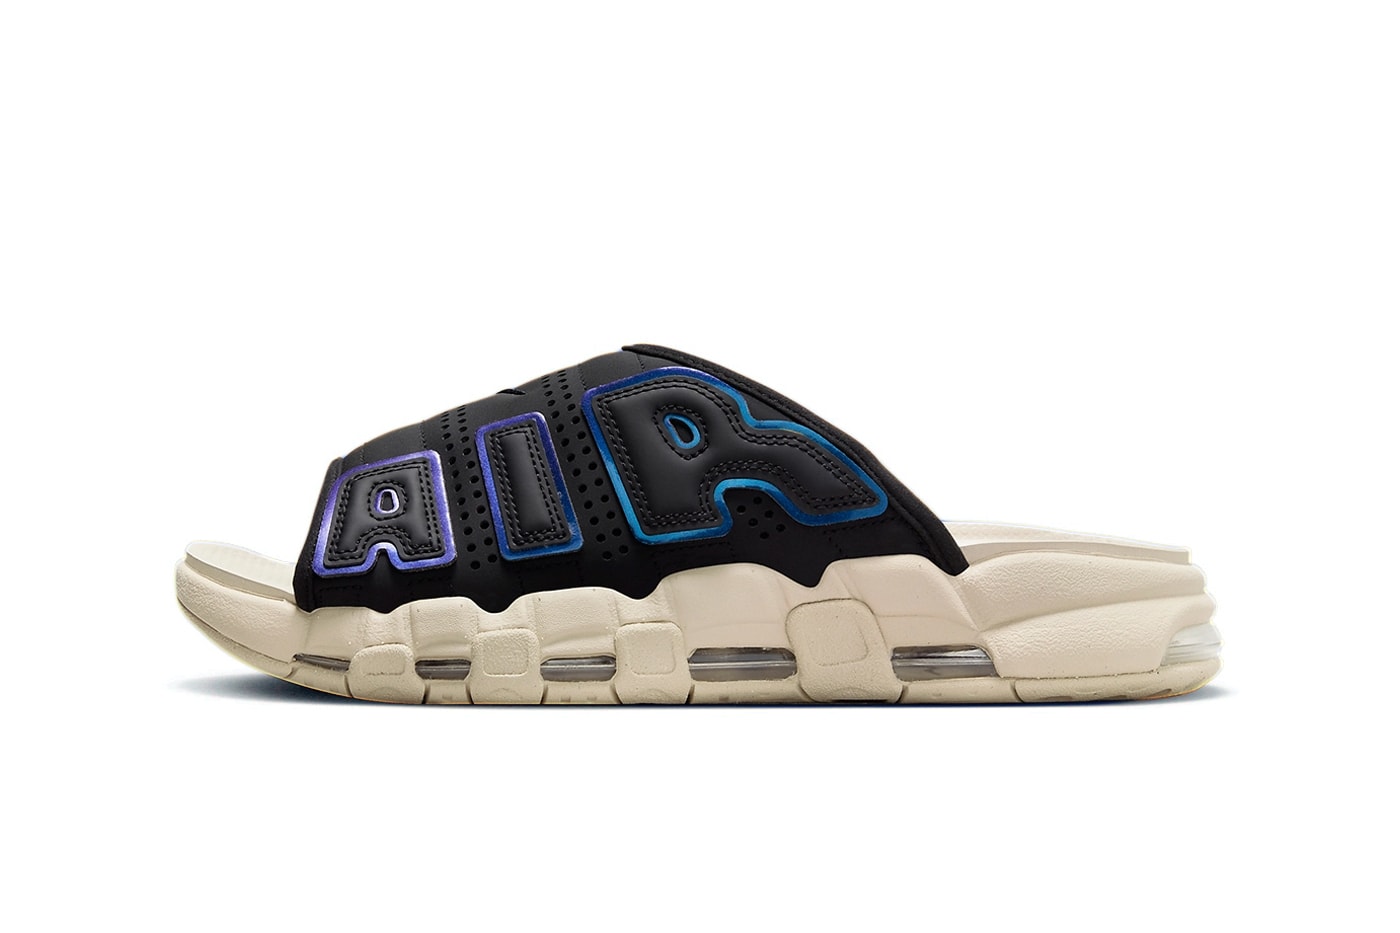 Nike Air More Uptempo Slide Surfaces in Blue Gradients full length air black cream white release info date price